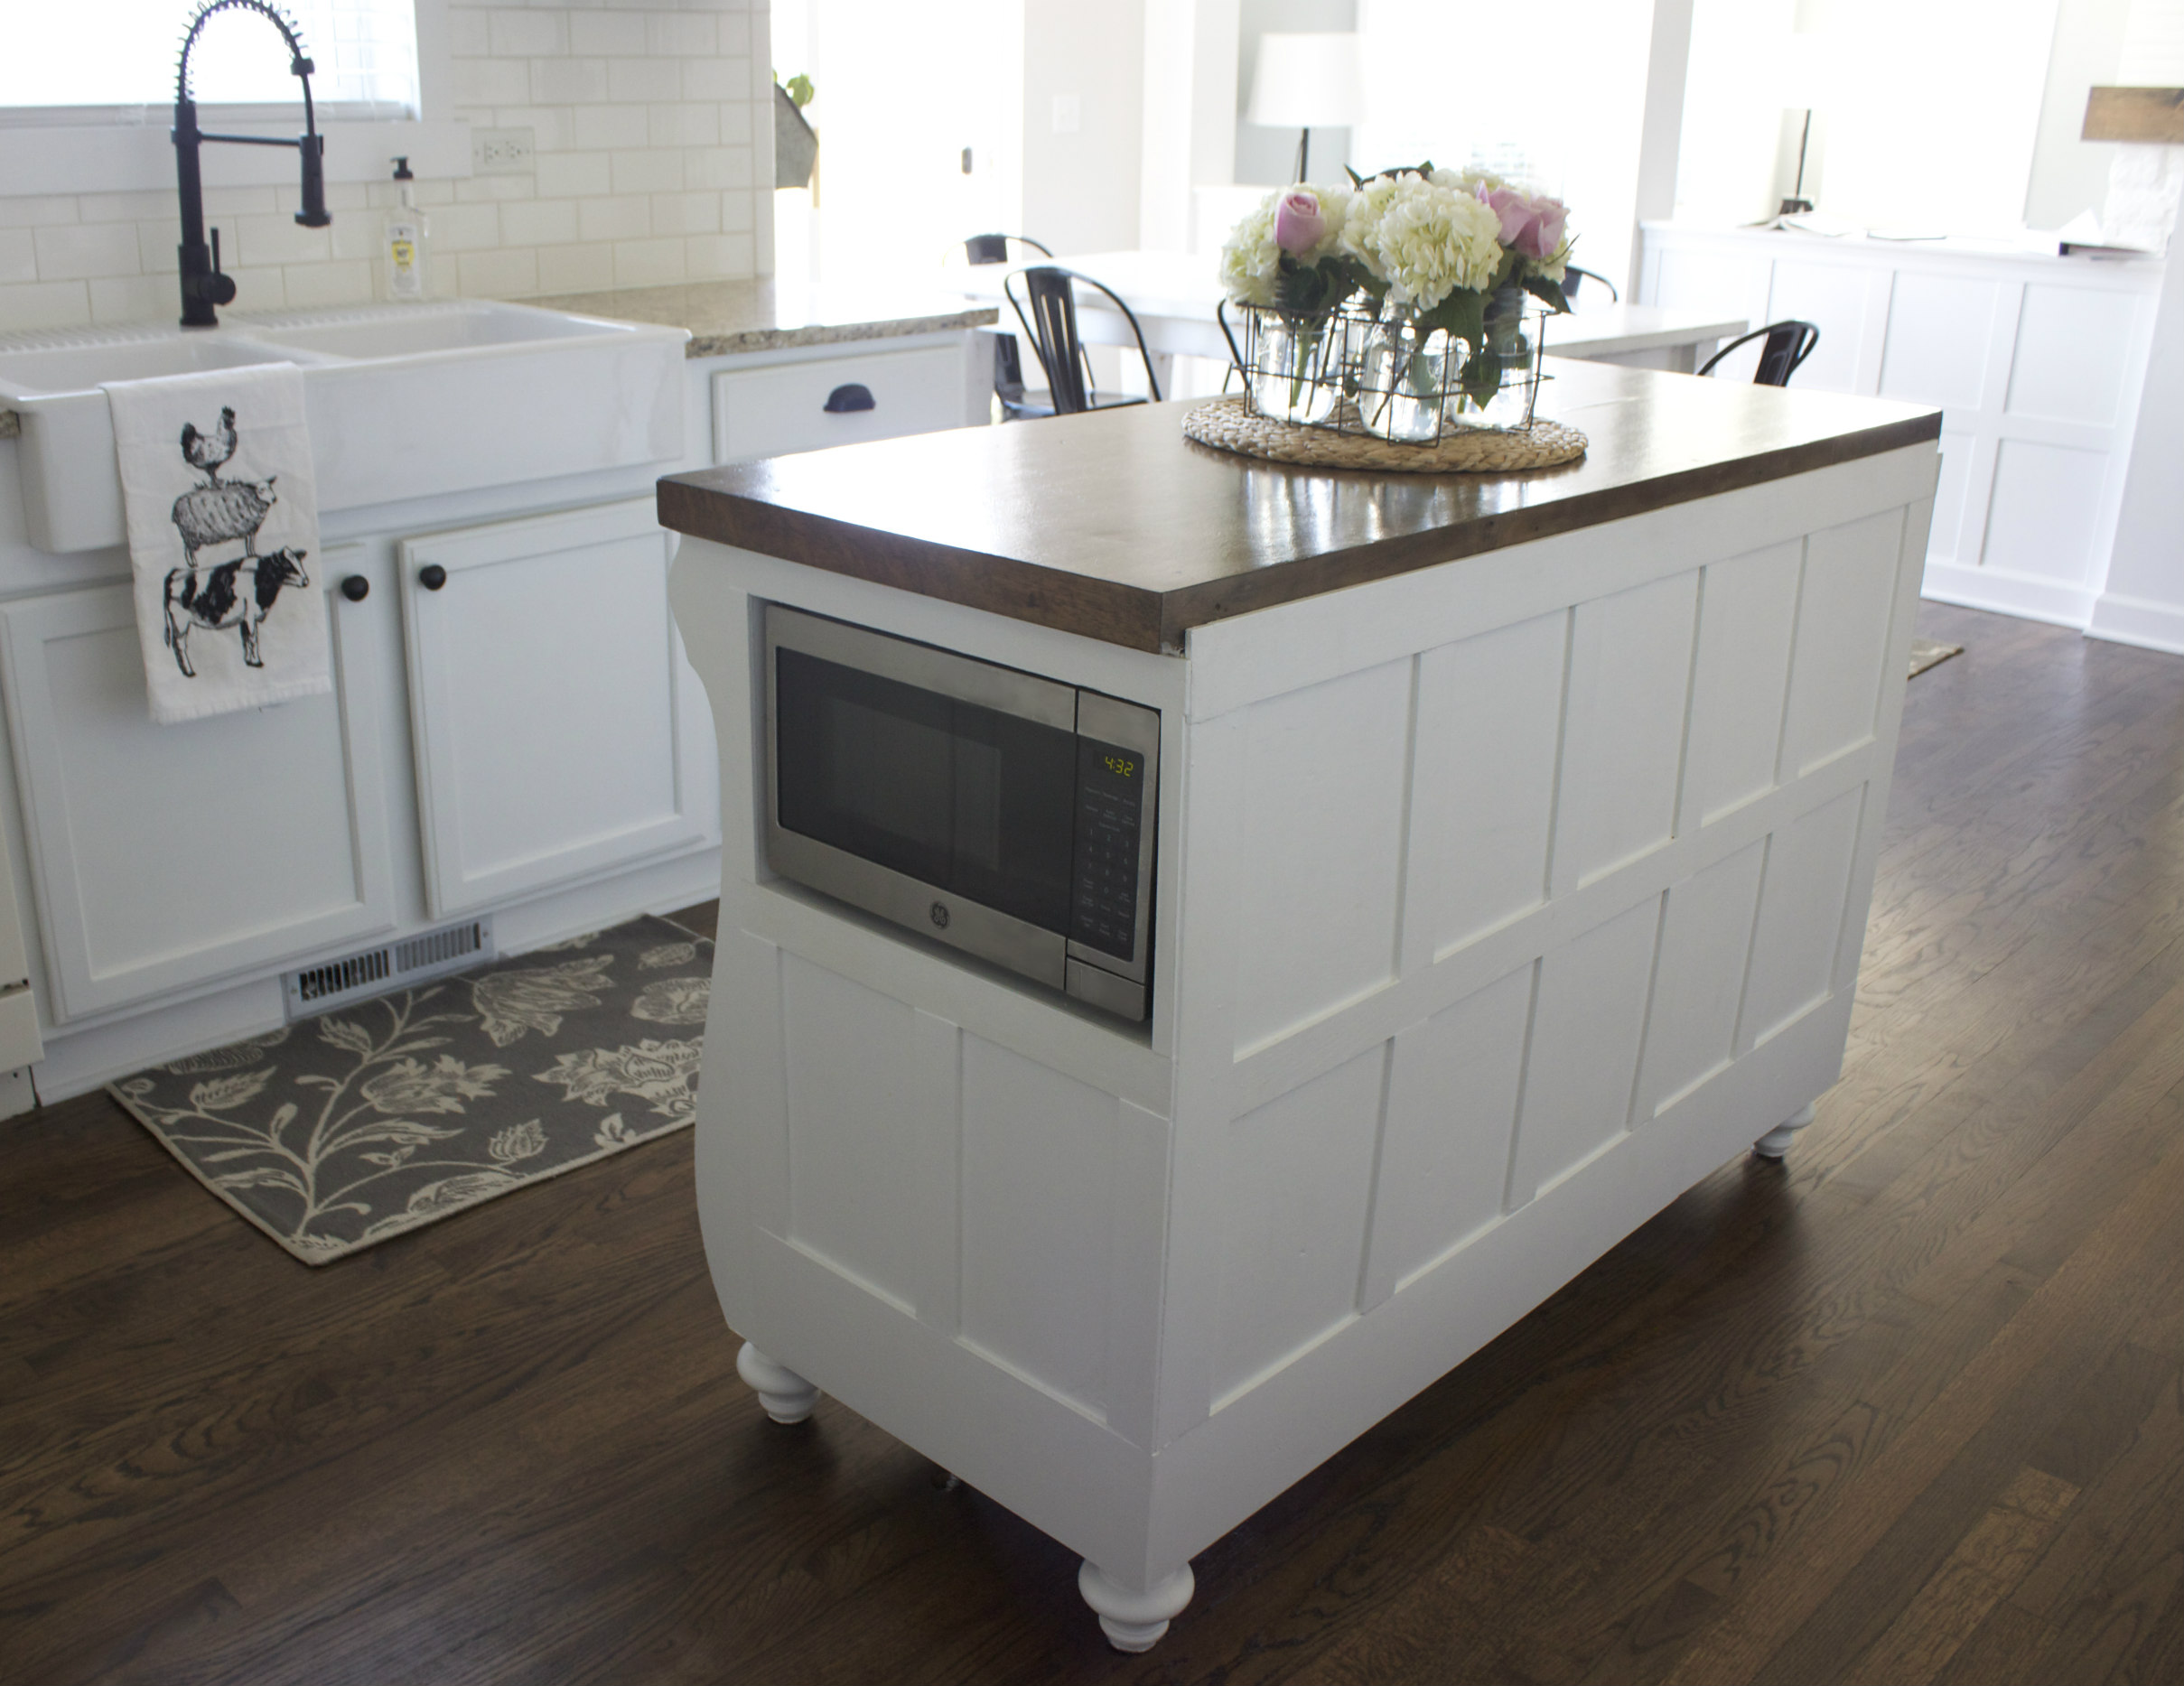 Adding A Microwave In Your Kitchen Island